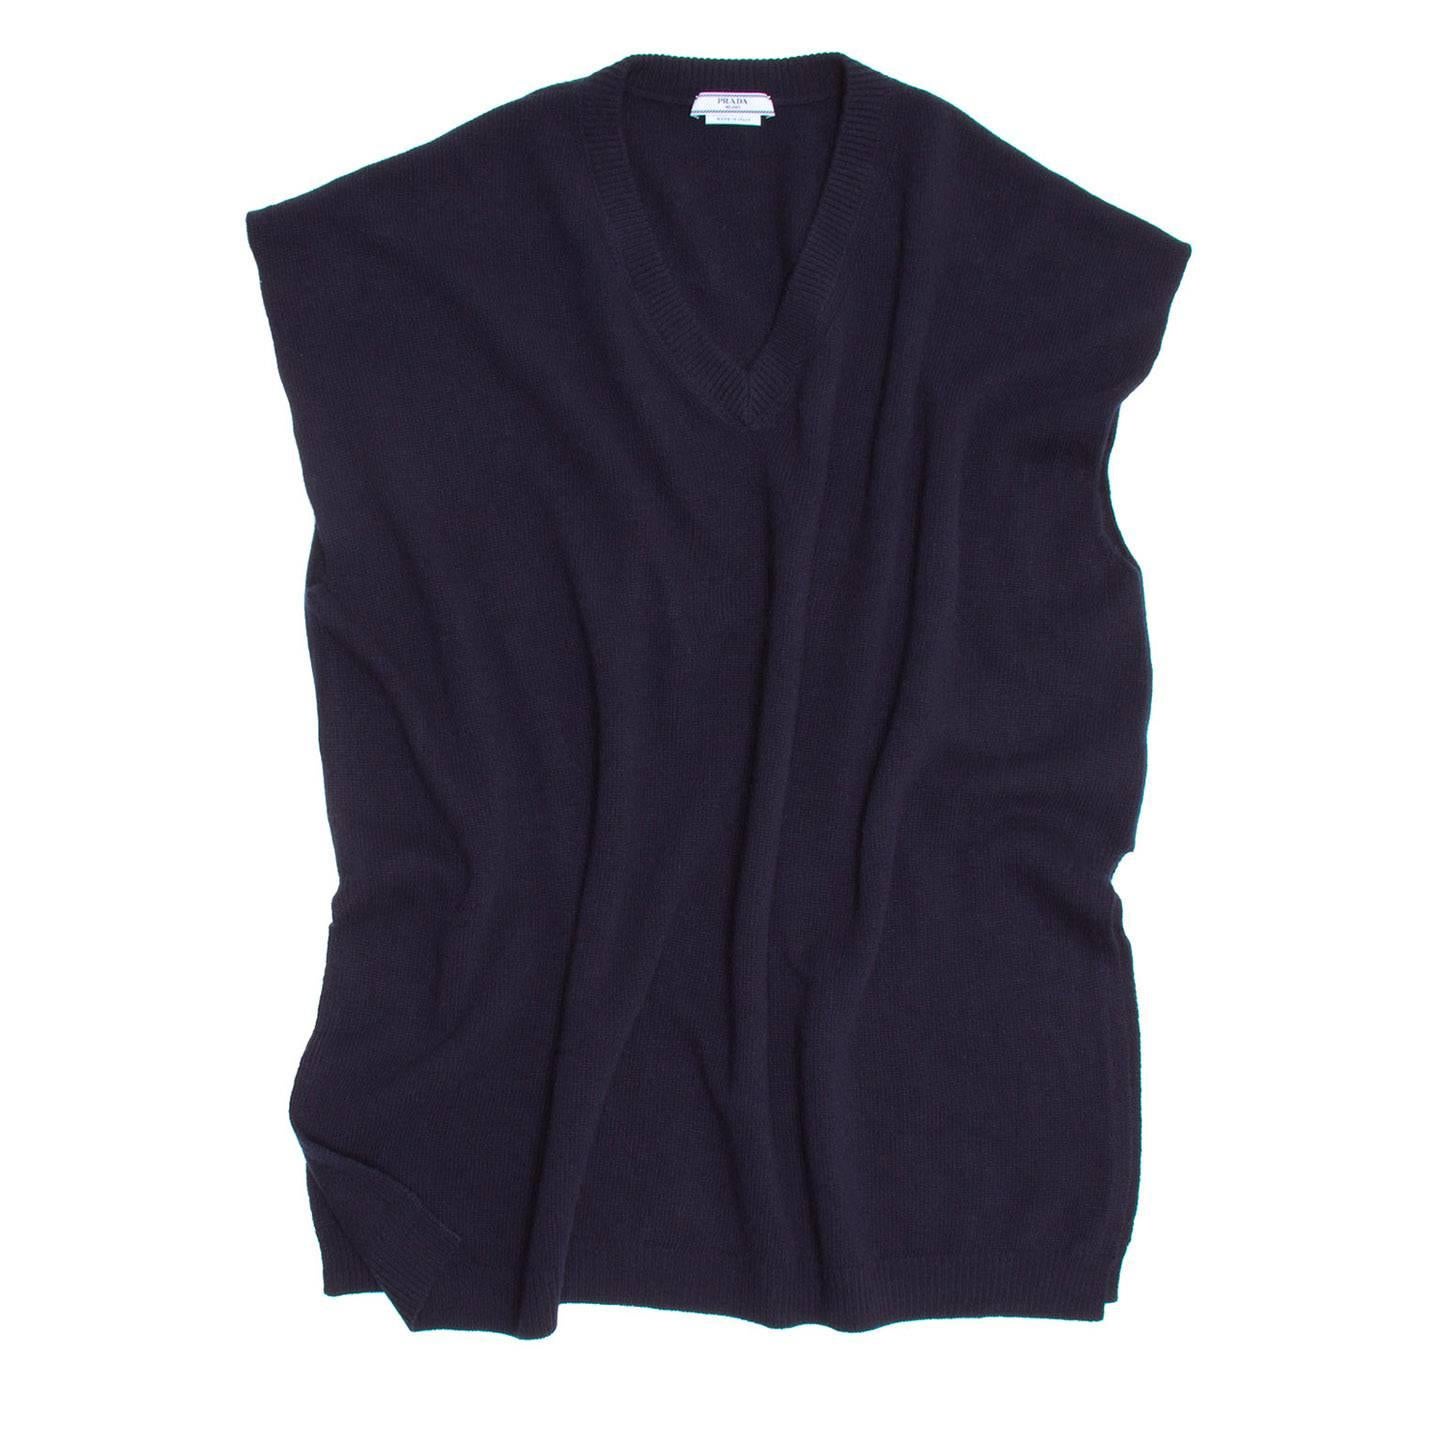 Wool/cashmere navy blue sleeveless V-neck knit top. The fit is long and boxy with dropped shoulders and side opening from hem to waist.

Size  40 Italian sizing

Condition  Excellent: never worn